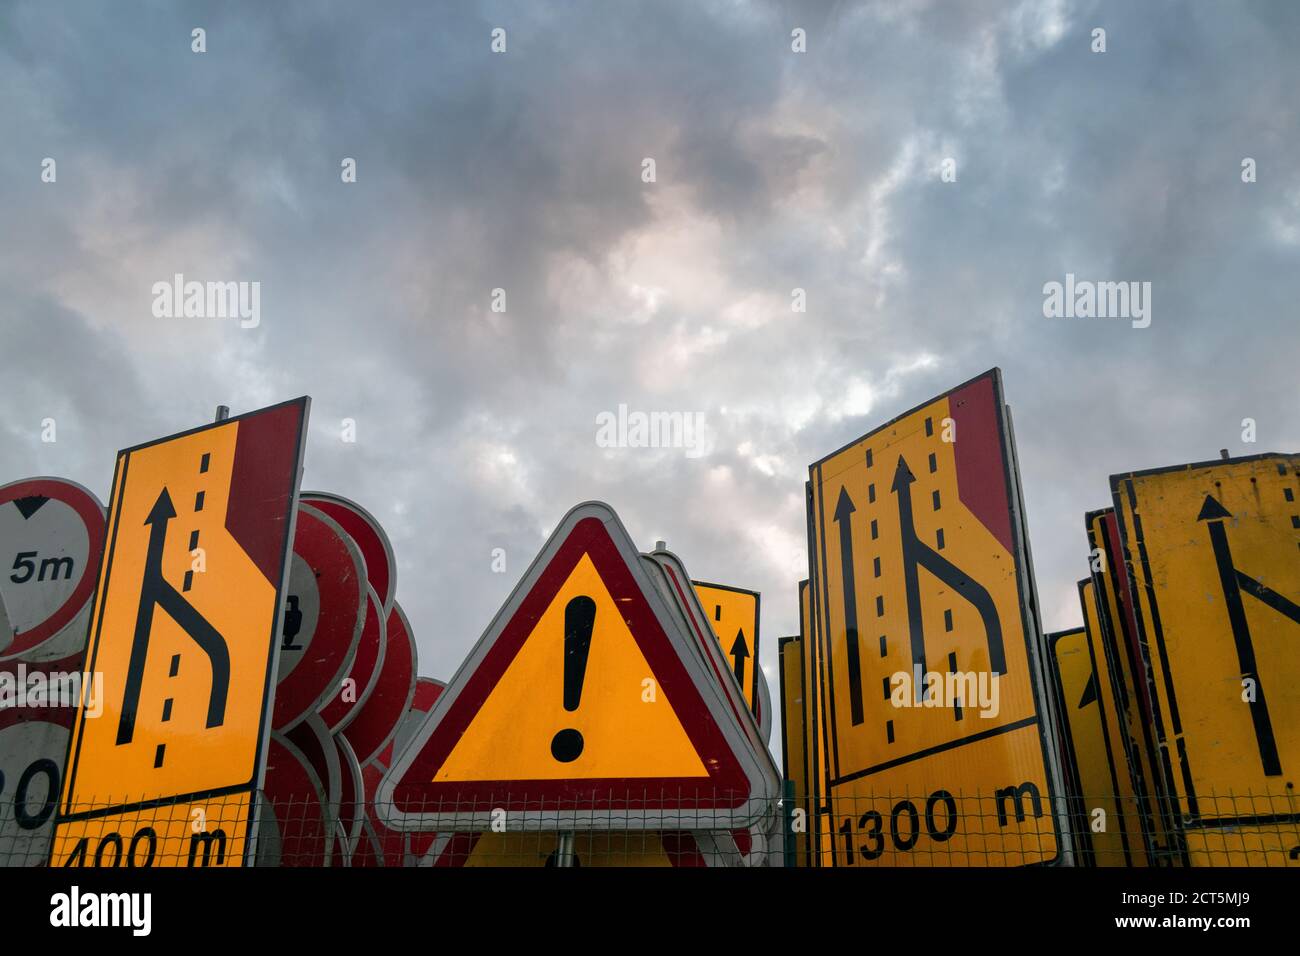 Traffic road signs used for accidents repairs and road maintenance in Cloudy background sky Stock Photo